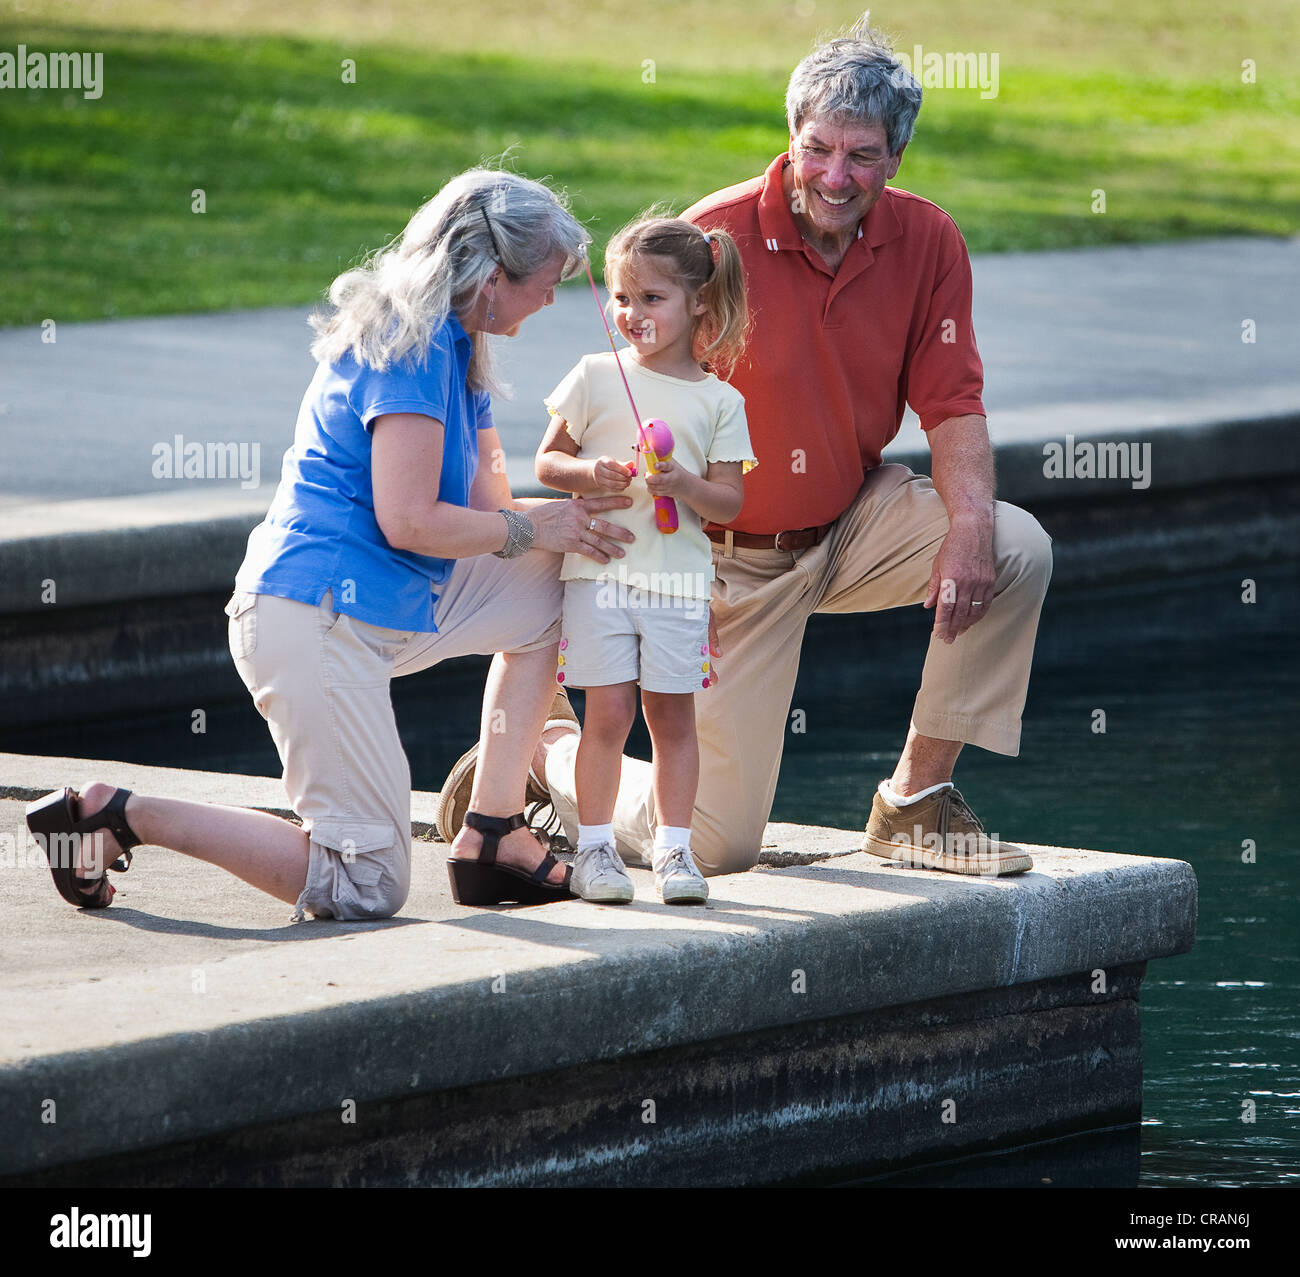 Grandmother and grandfather play with granddaughter at park by local pond. Stock Photo